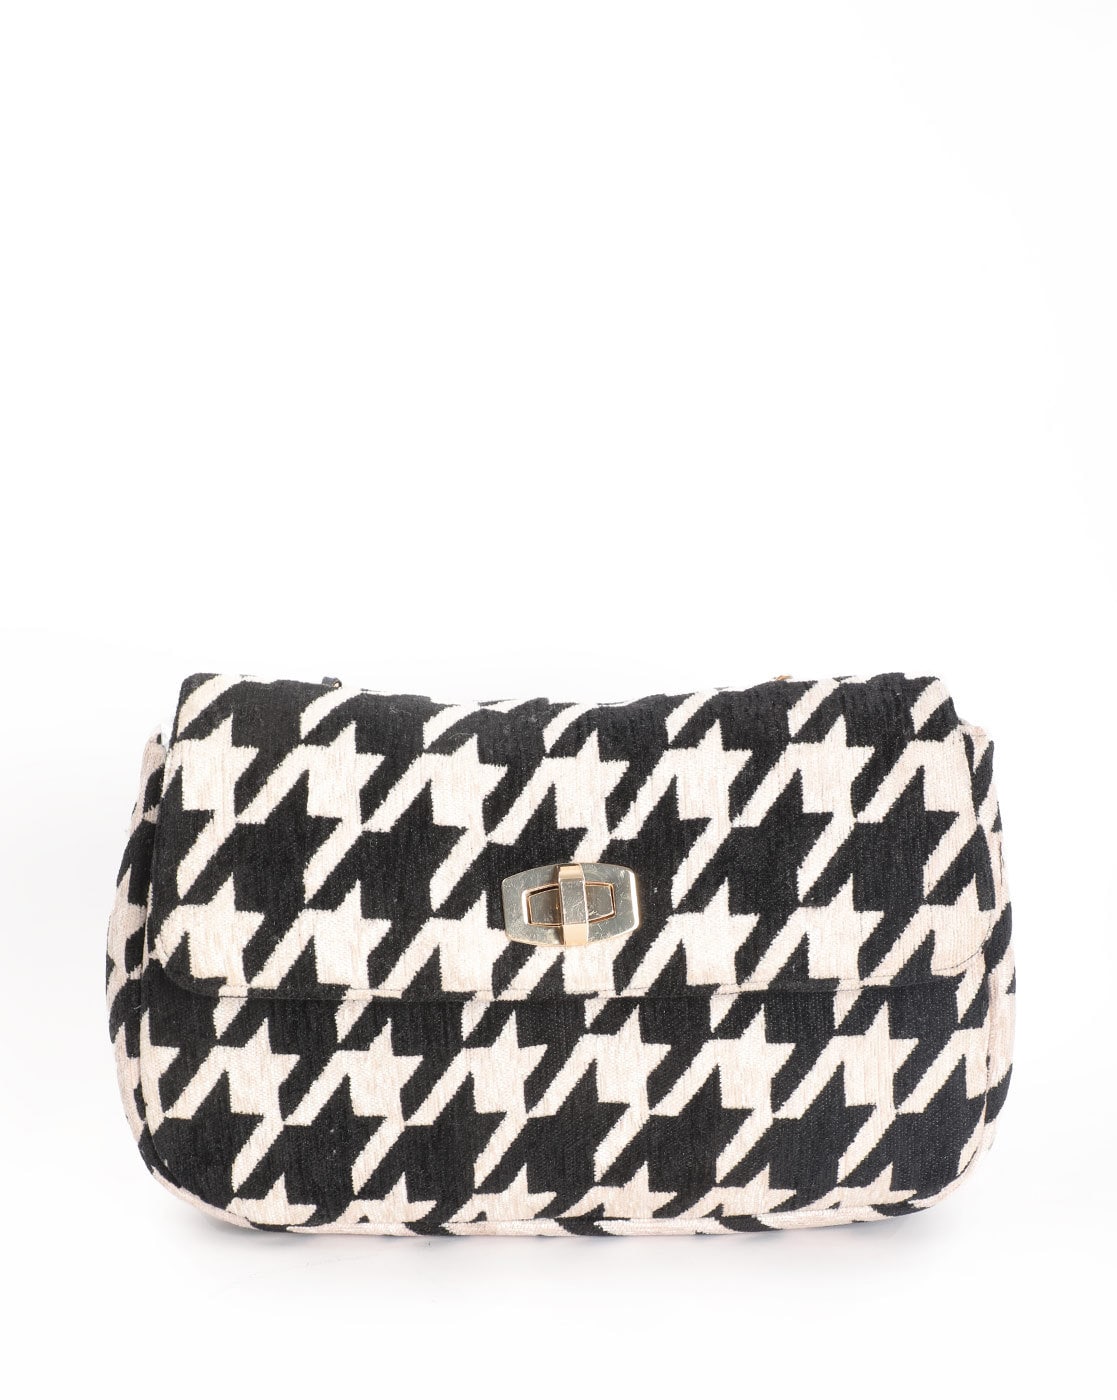 The 3 Best Black and White Handbags to carry post Labor Day - PurseBlog